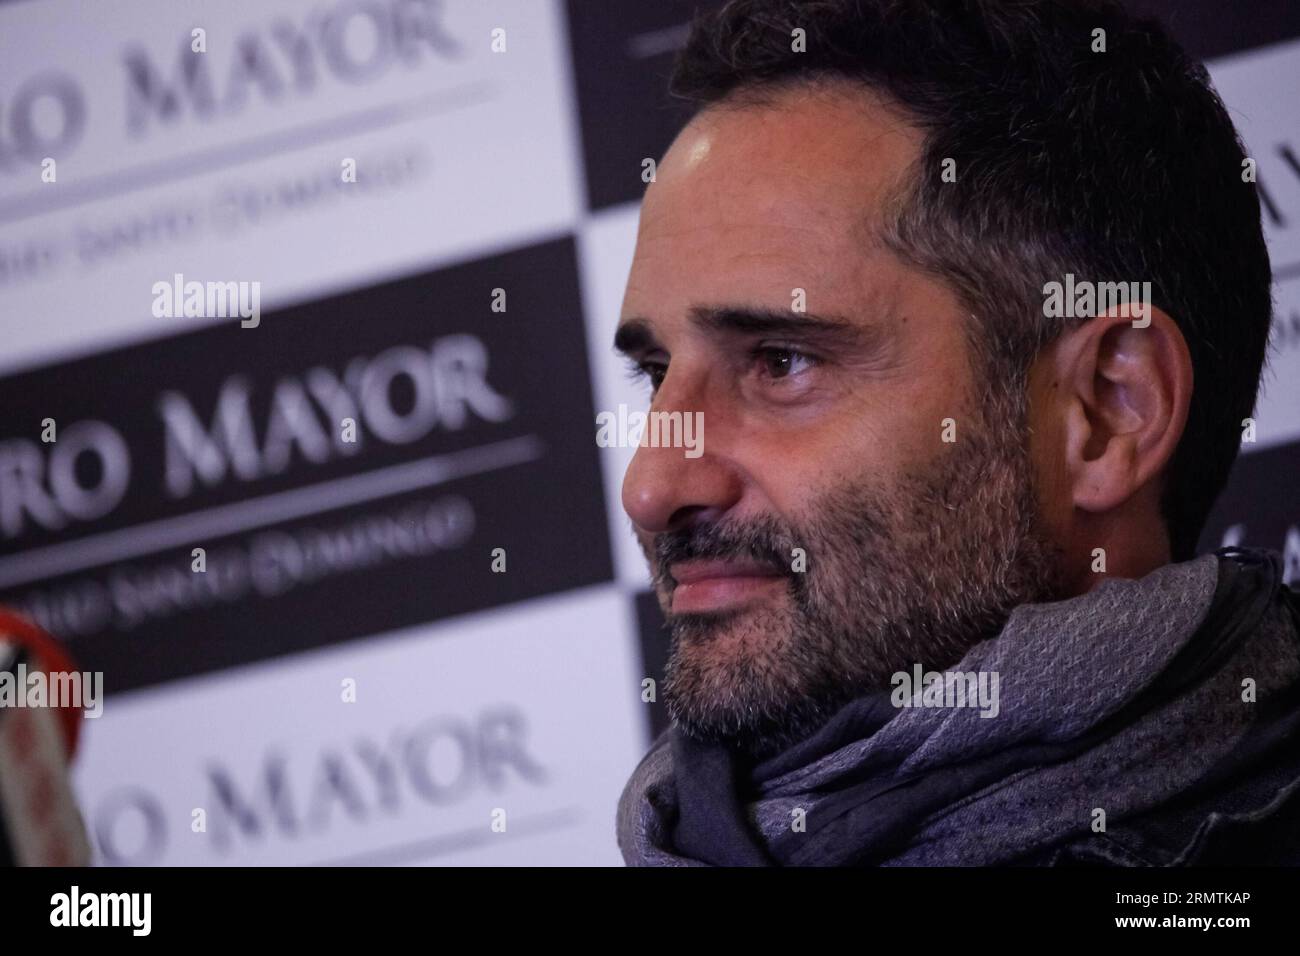 Uruguayan composer and singer Jorge Drexler attends a press briefing in Bogota, Colombia, on Sept. 8, 2014. Jorge Drexler, who won the Oscar award for the Best Original Song in the movie Diarios de Motocicleta (The Motorcycle Diaries), is in Bogota to perform on two presentations Sept. 9-10 at Julio Mario Santo Domingo Theater. Jhon Paz) (bxq) COLOMBIA-BOGOTA-MUSIC-DREXLER e JhonxPaz PUBLICATIONxNOTxINxCHN   Uruguayan Composer and Singer Jorge Drexler Attends a Press Briefing in Bogota Colombia ON Sept 8 2014 Jorge Drexler Who Won The Oscar Award for The Best Original Song in The Movie  de  Th Stock Photo